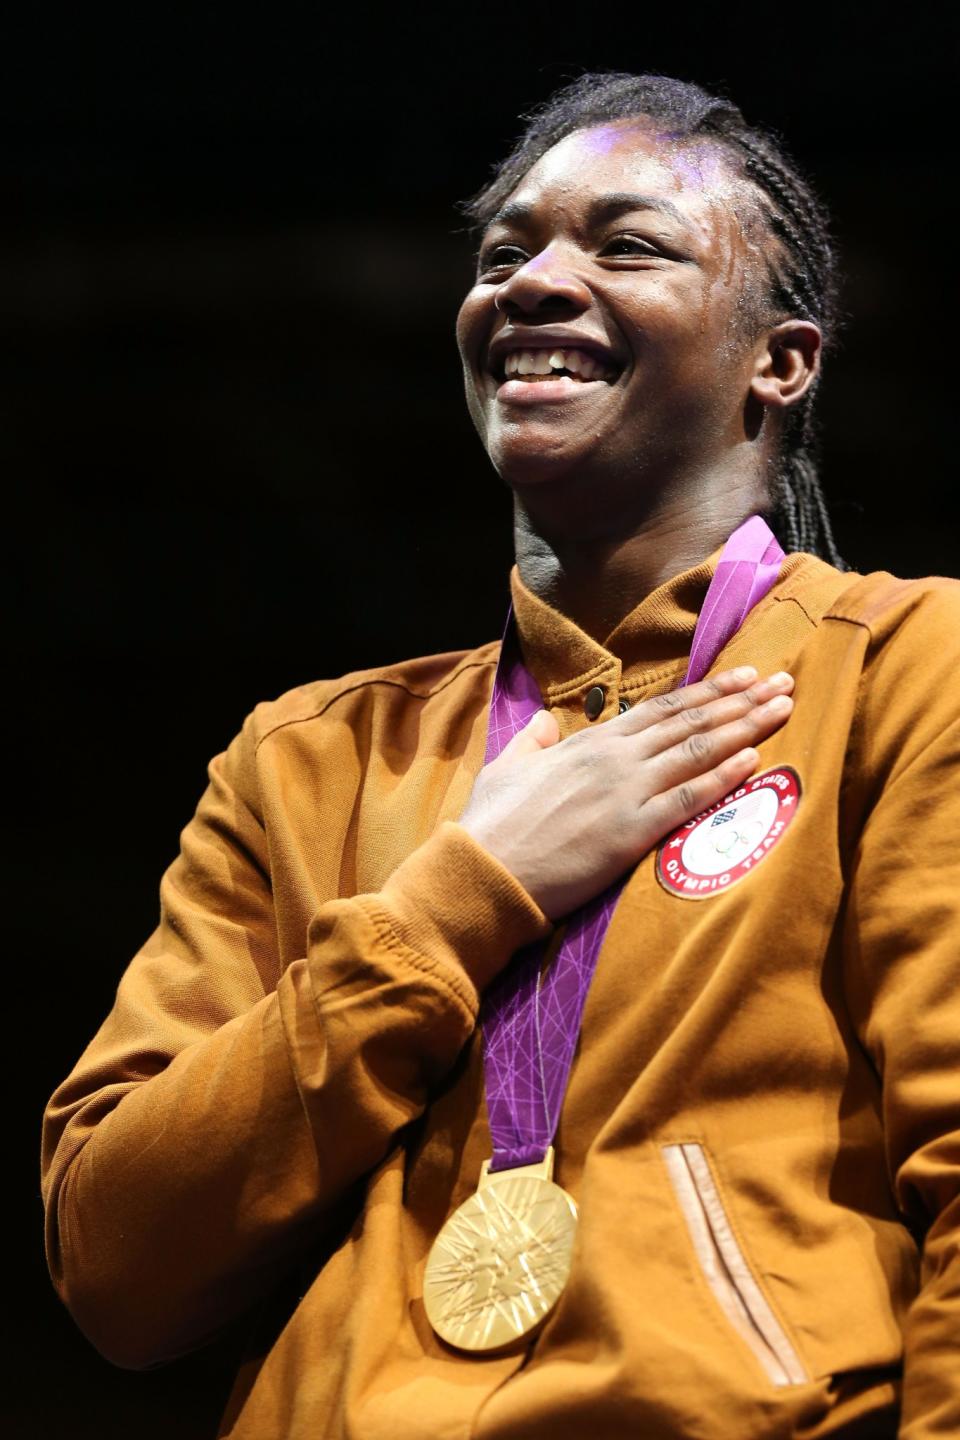 <p>Female boxer Claressa Shields won gold at her first Olympics in London. (Getty) </p>